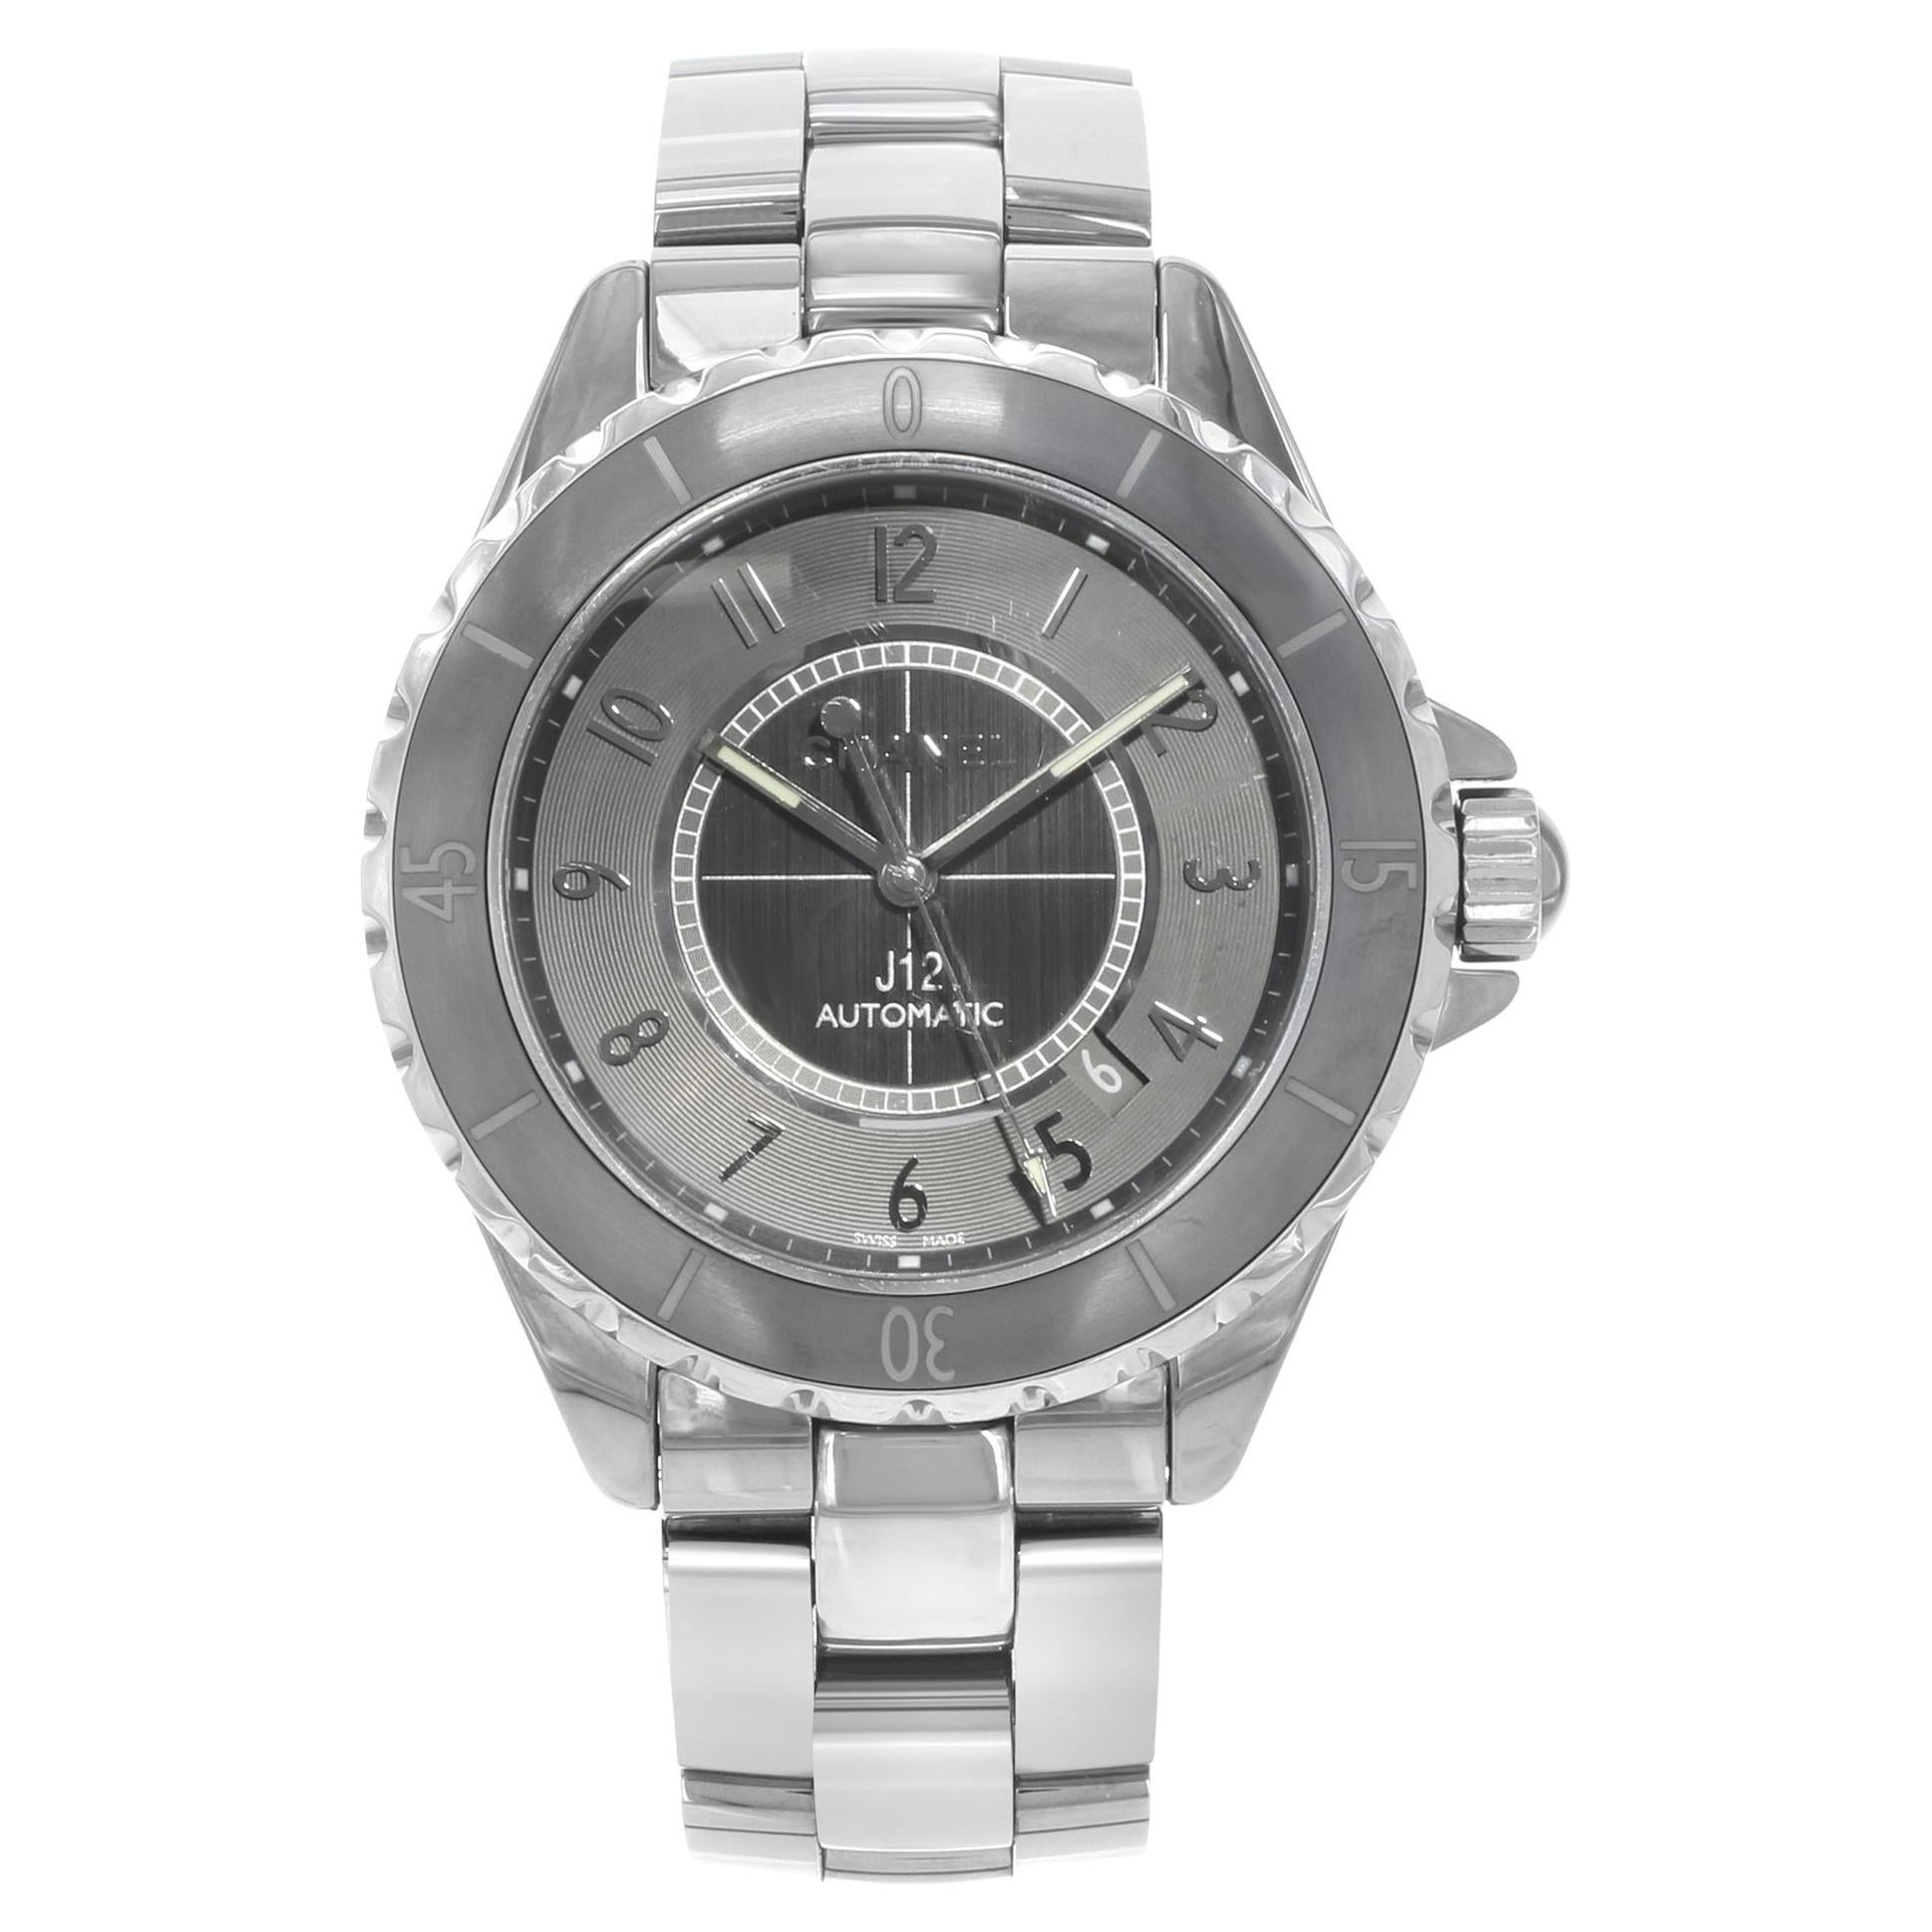 Chanel J12 Chromatic Gray Arabic Dial Ceramic Steel Automatic Unisex Watch H2934 For Sale